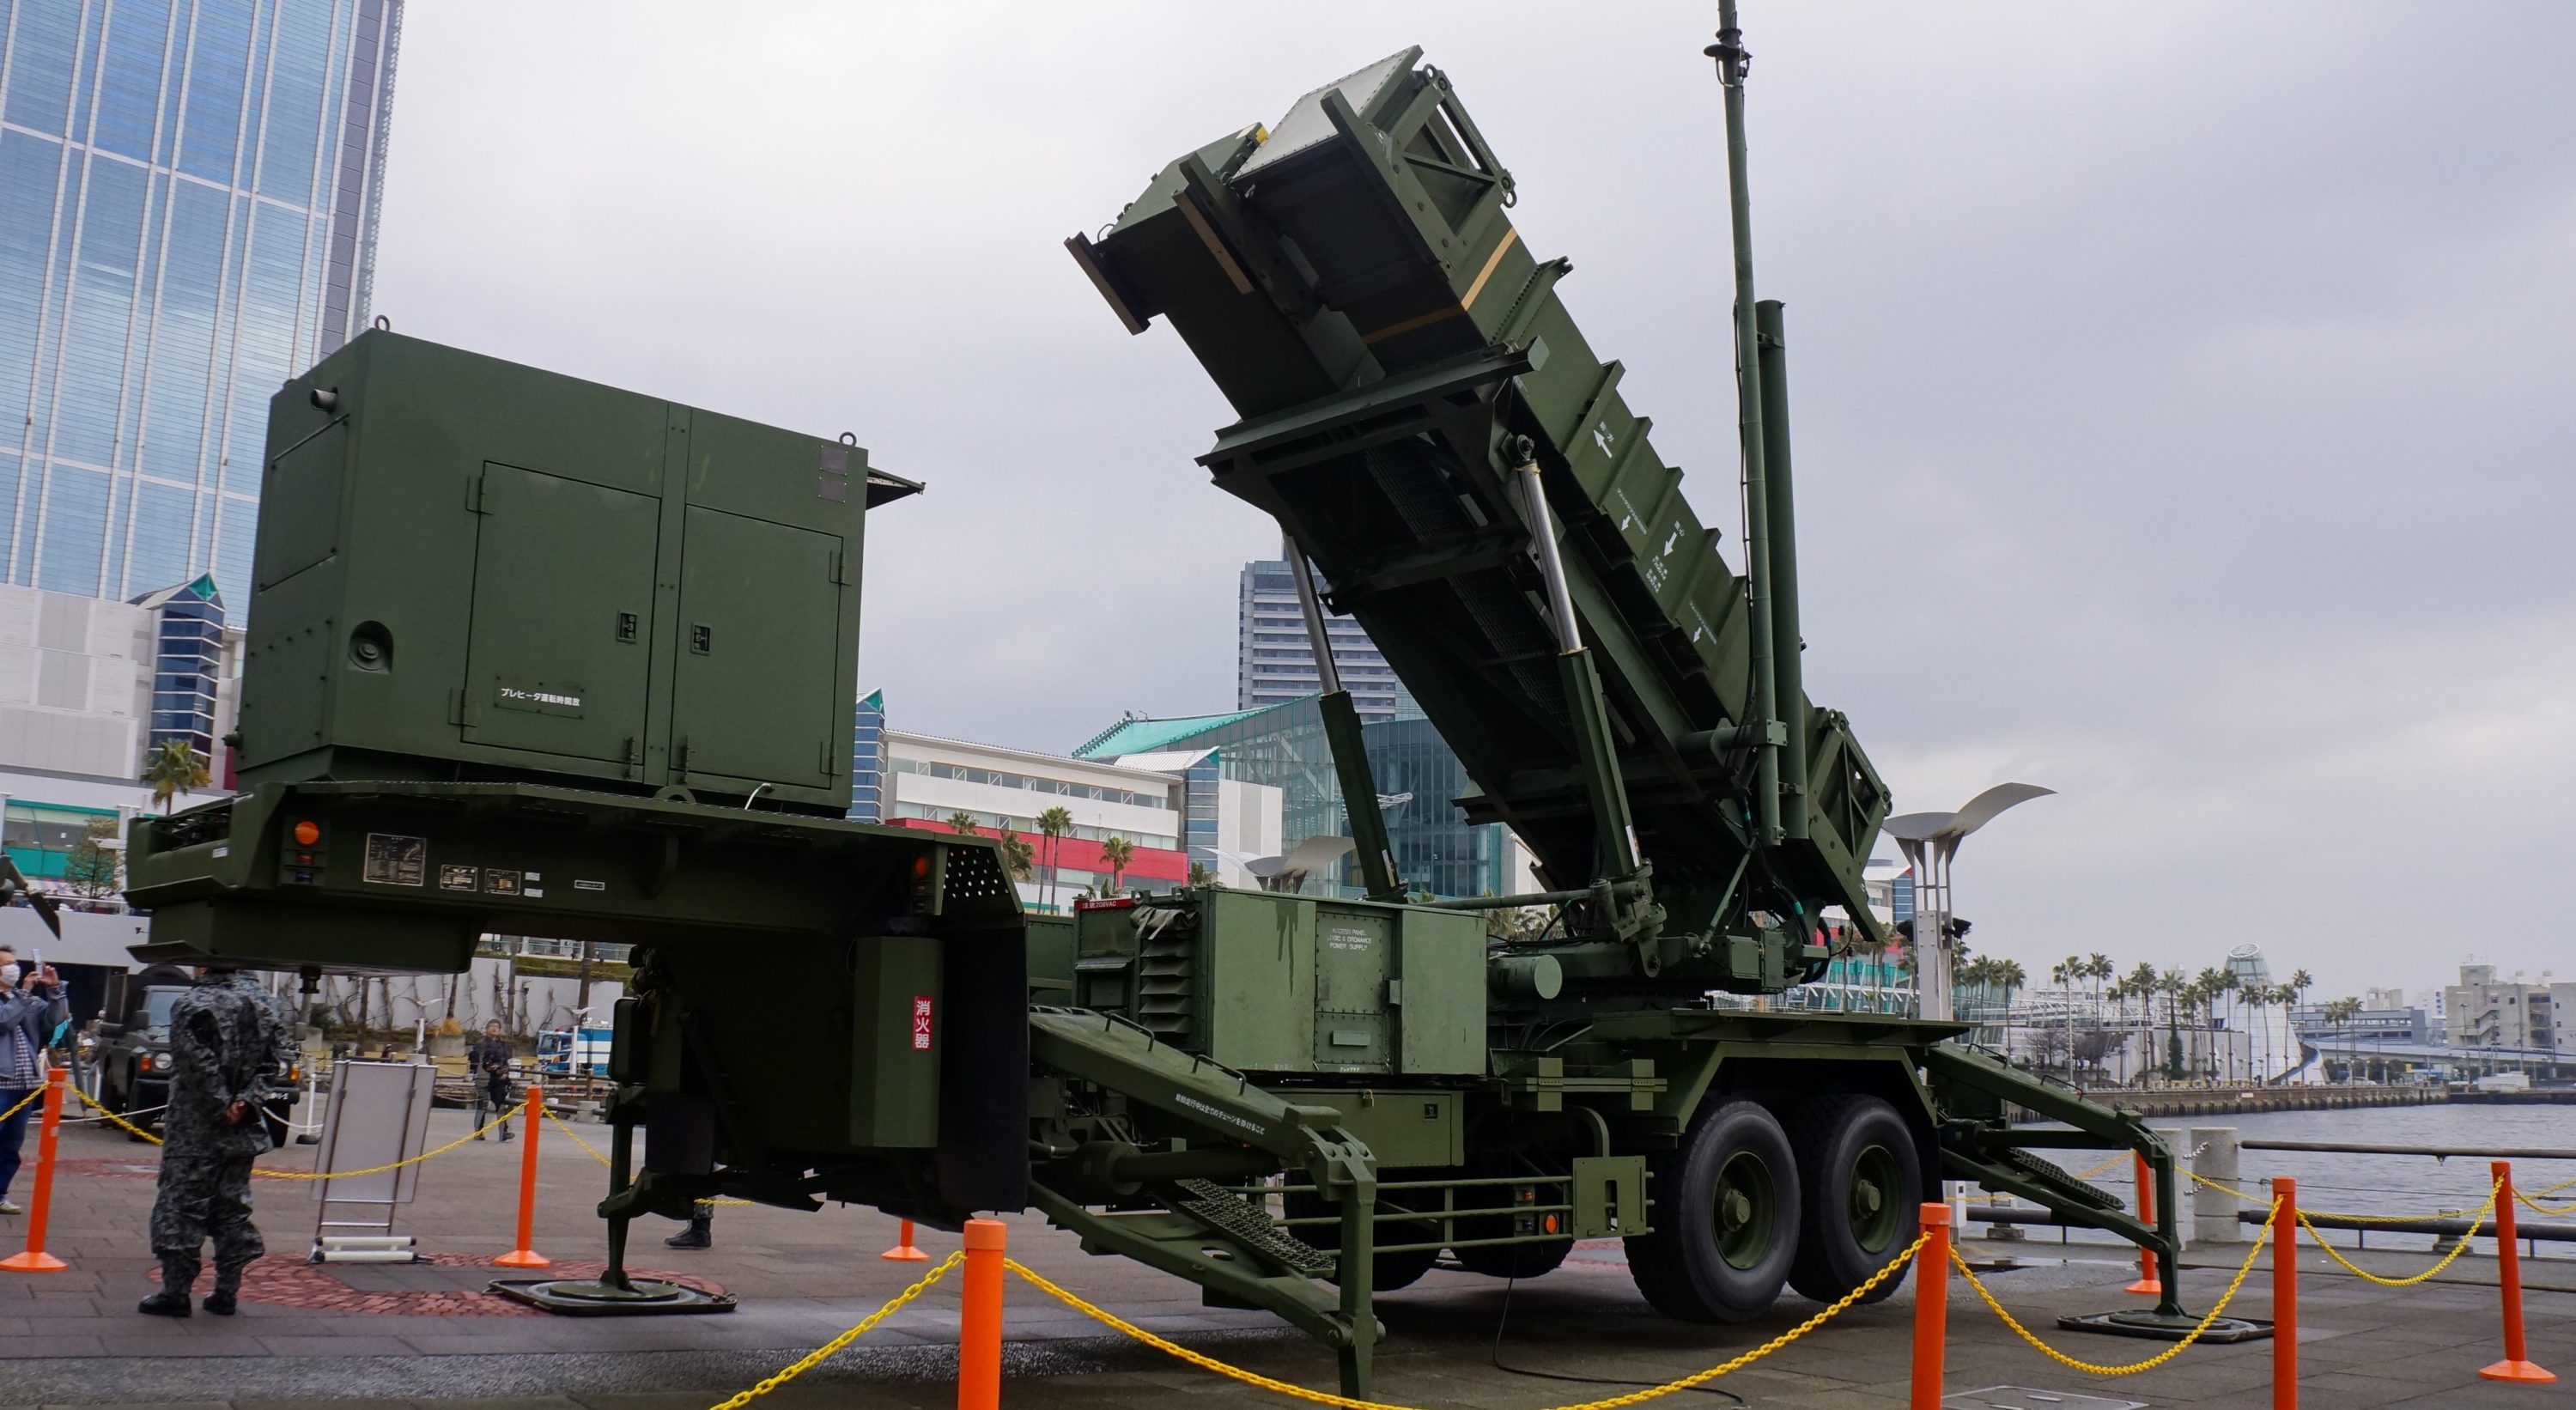 Japan installs anti-missile systems in north of country due to North Korean threat